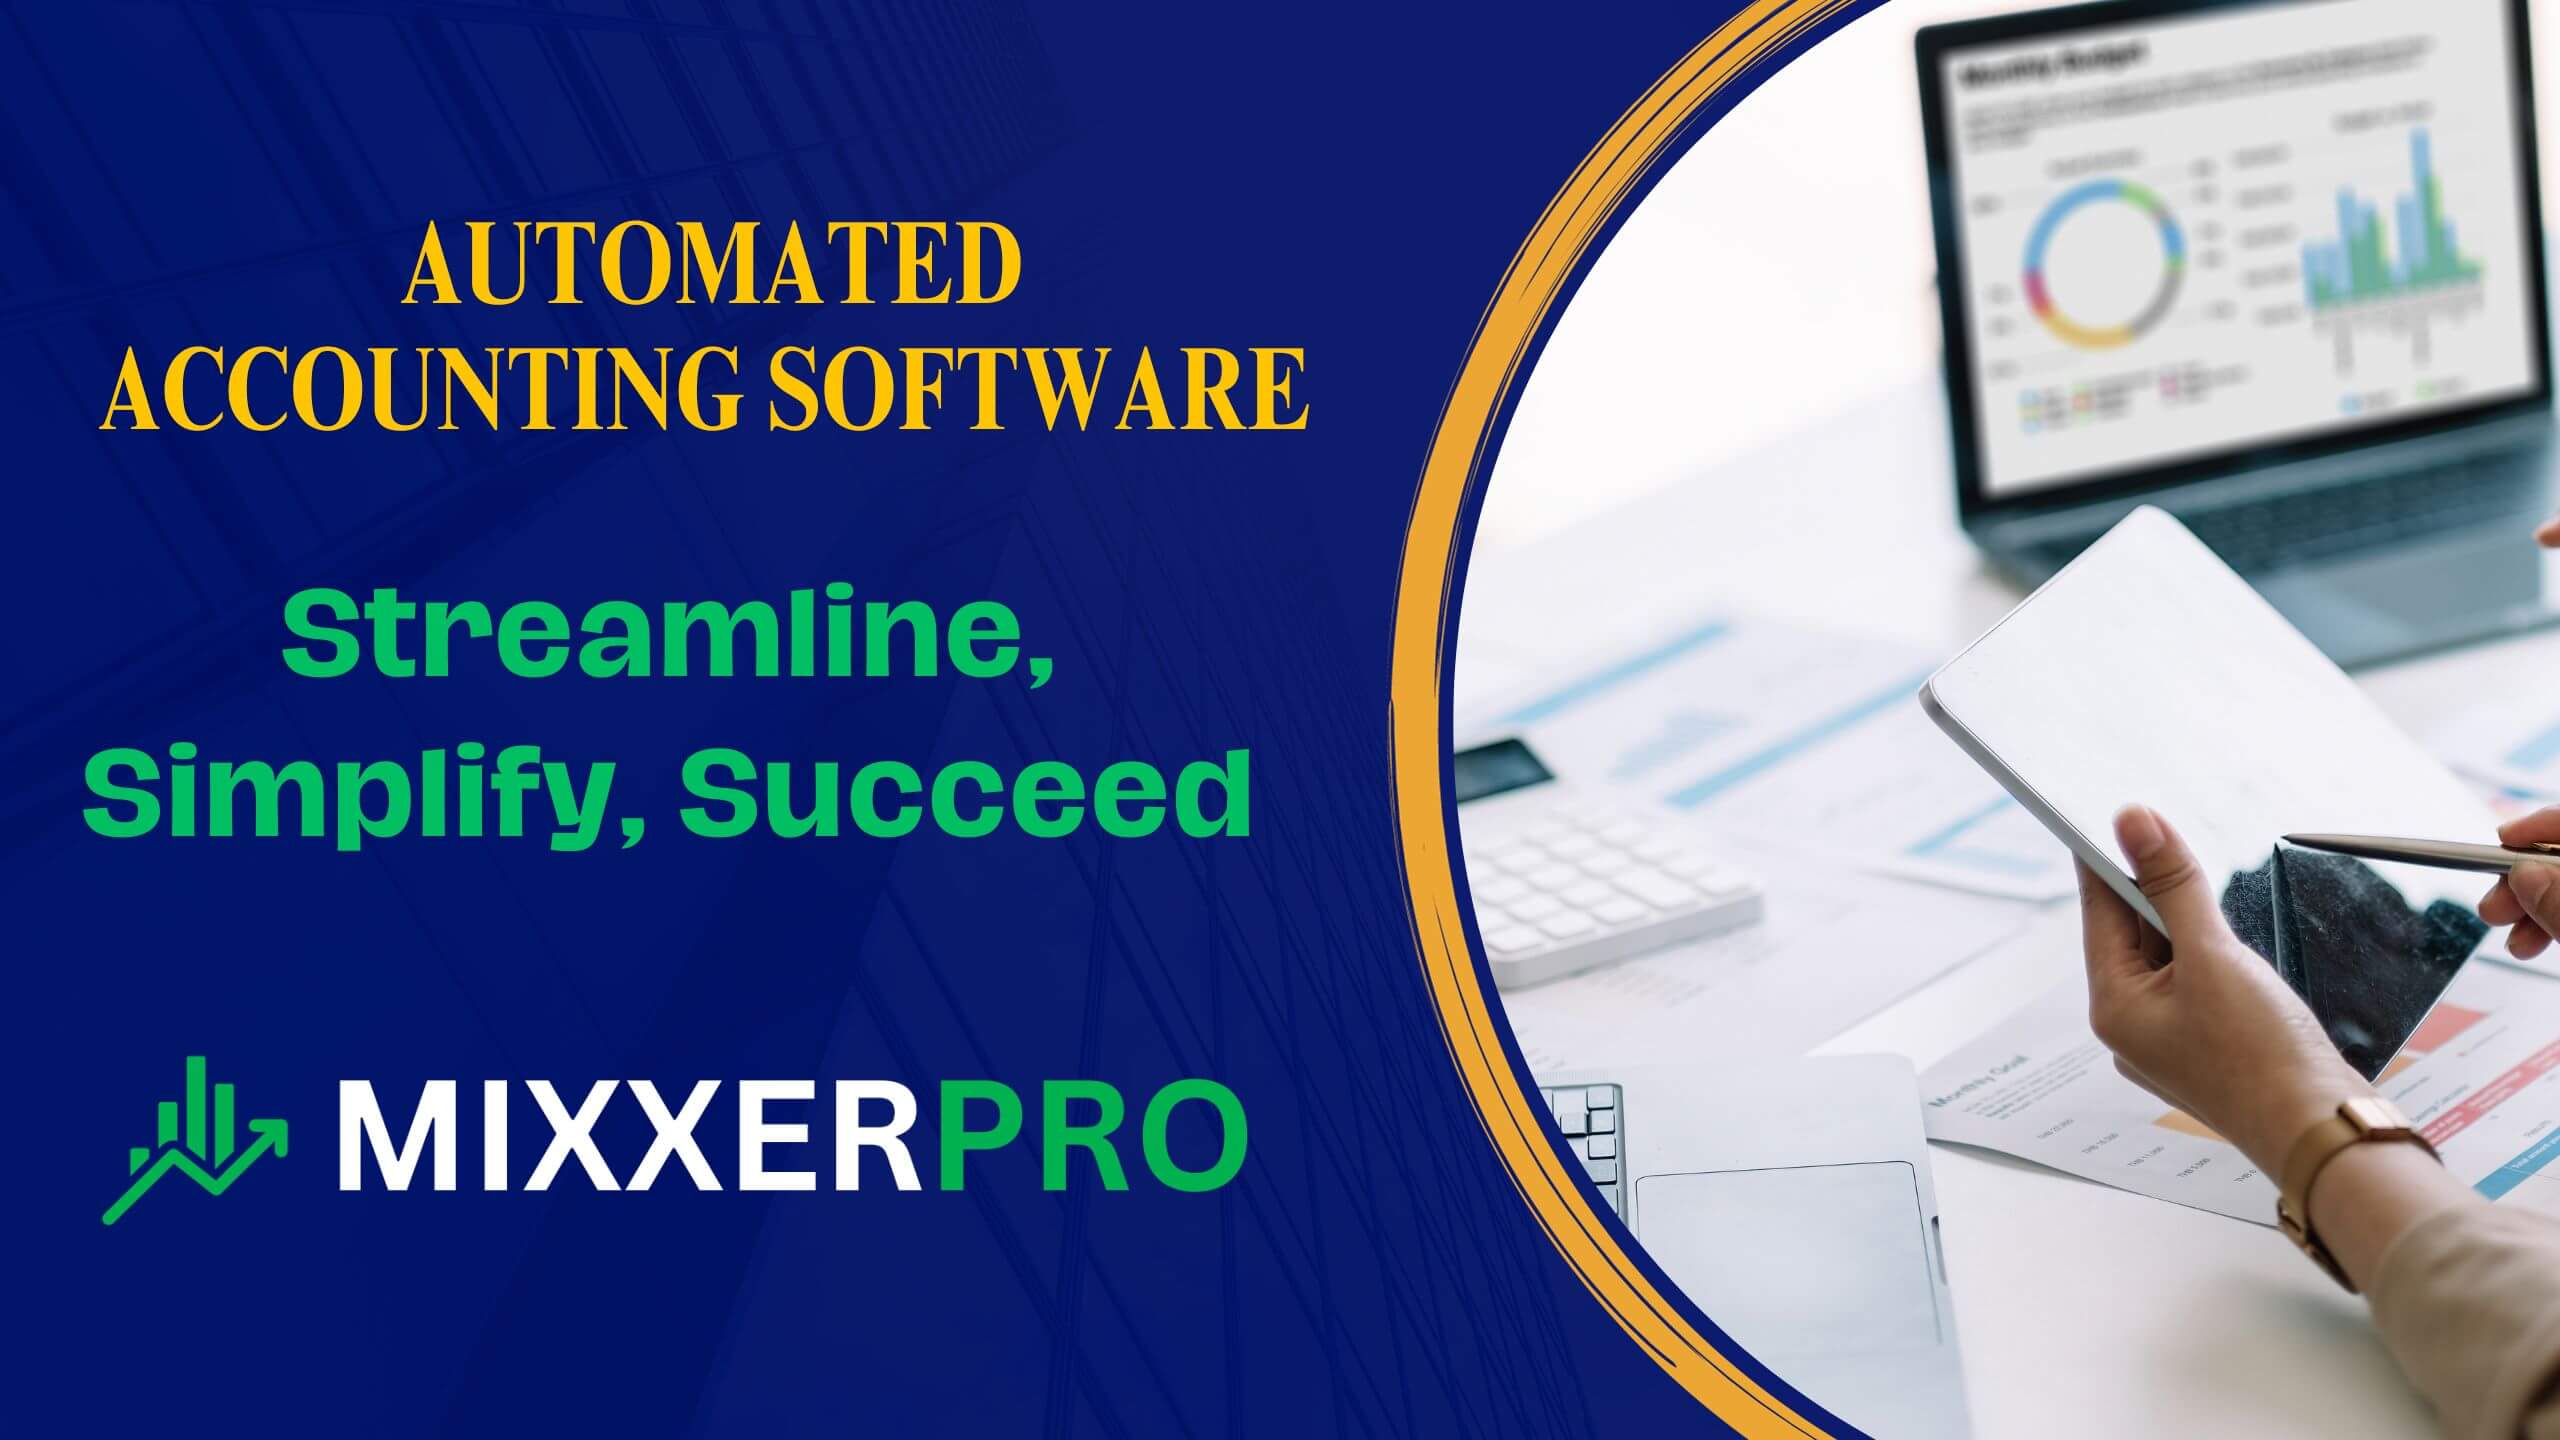 You are currently viewing Automated Accounting Software: Streamline, Simplify, Succeed